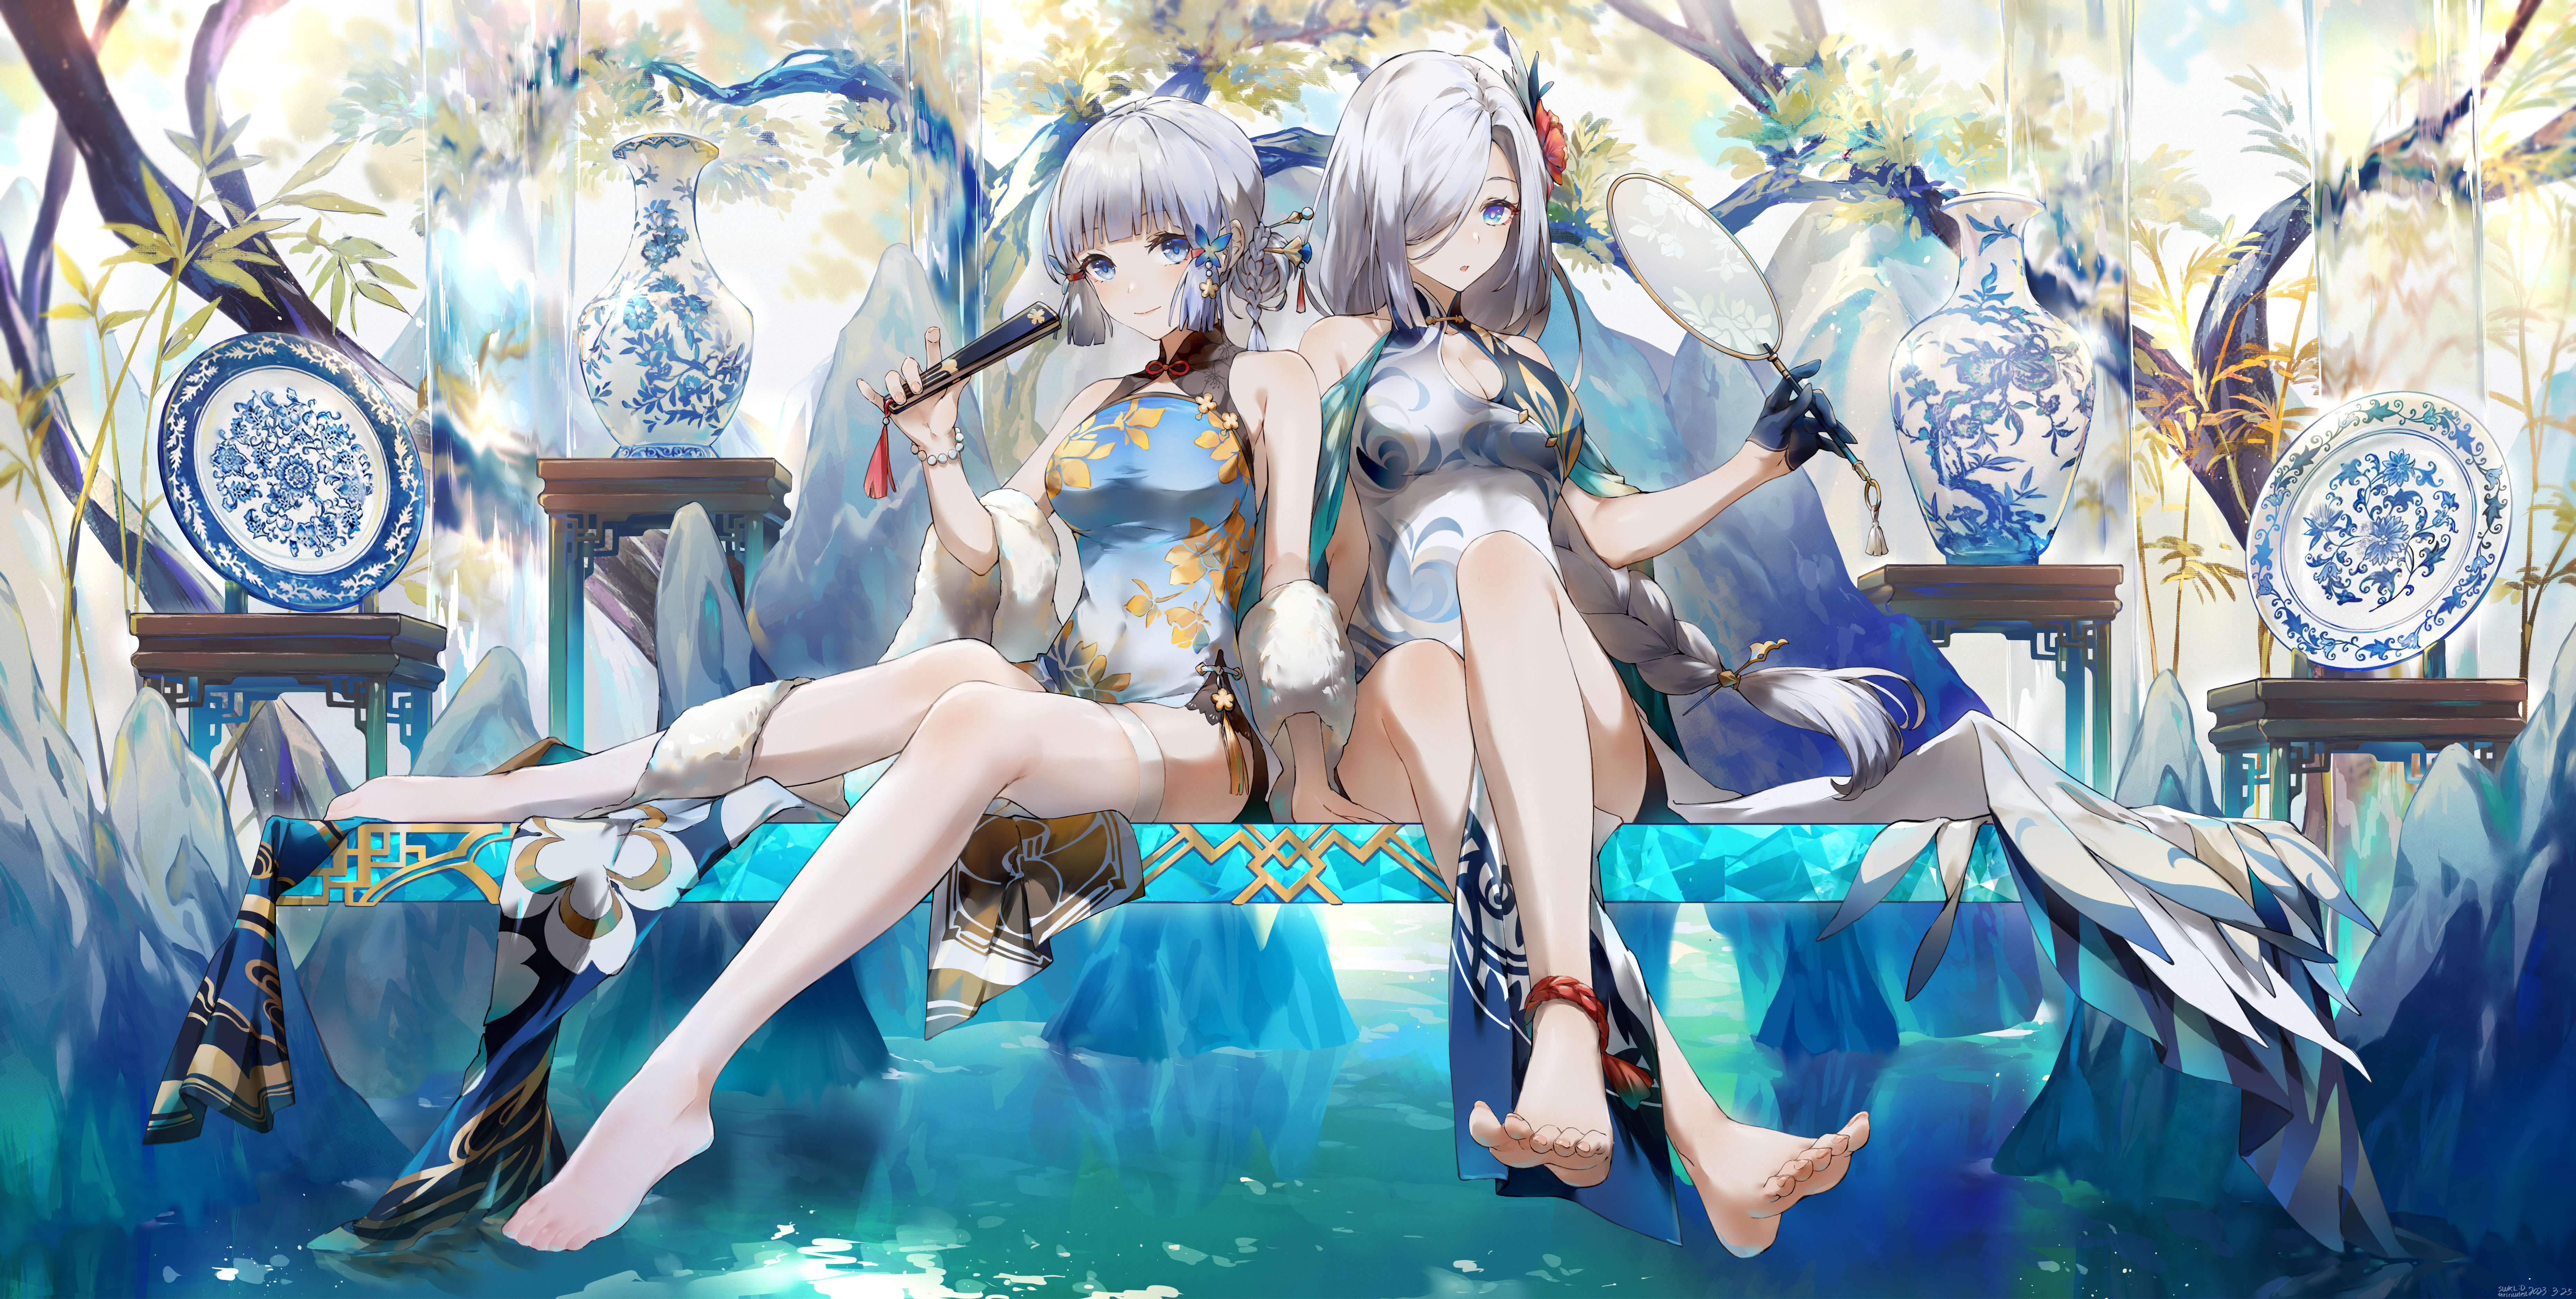 Anime 7442x3754 Genshin Impact anime Kamisato Ayaka (Genshin Impact) Shenhe (Genshin Impact) two women waterfall trees looking at viewer barefoot water Porcelain chinese dress legs crossed plates stockings fans hair over one eye vases